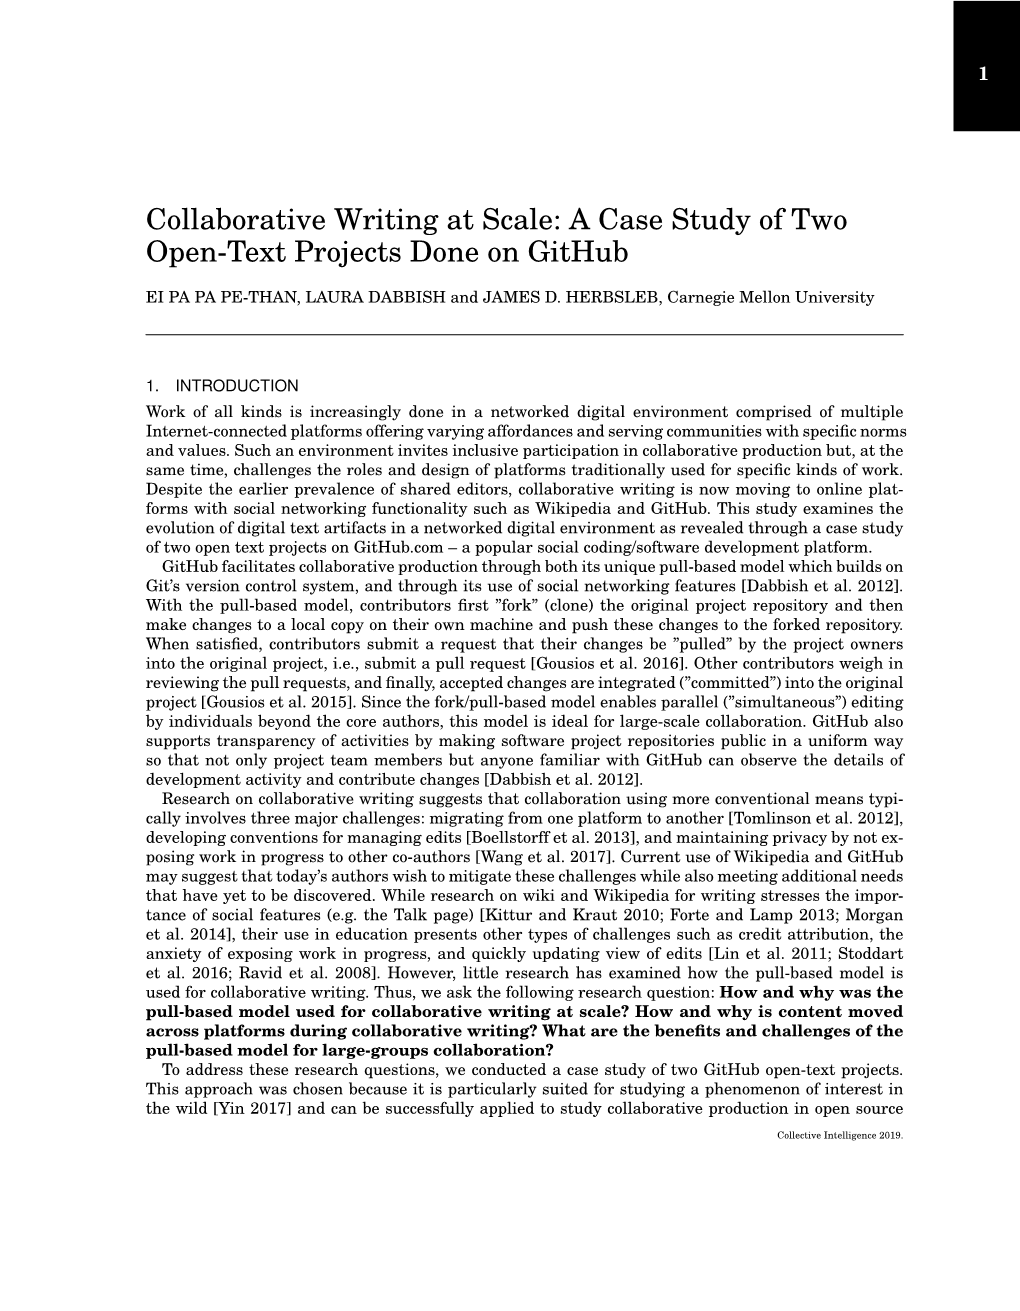 Collaborative Writing at Scale: a Case Study of Two Open-Text Projects Done on Github